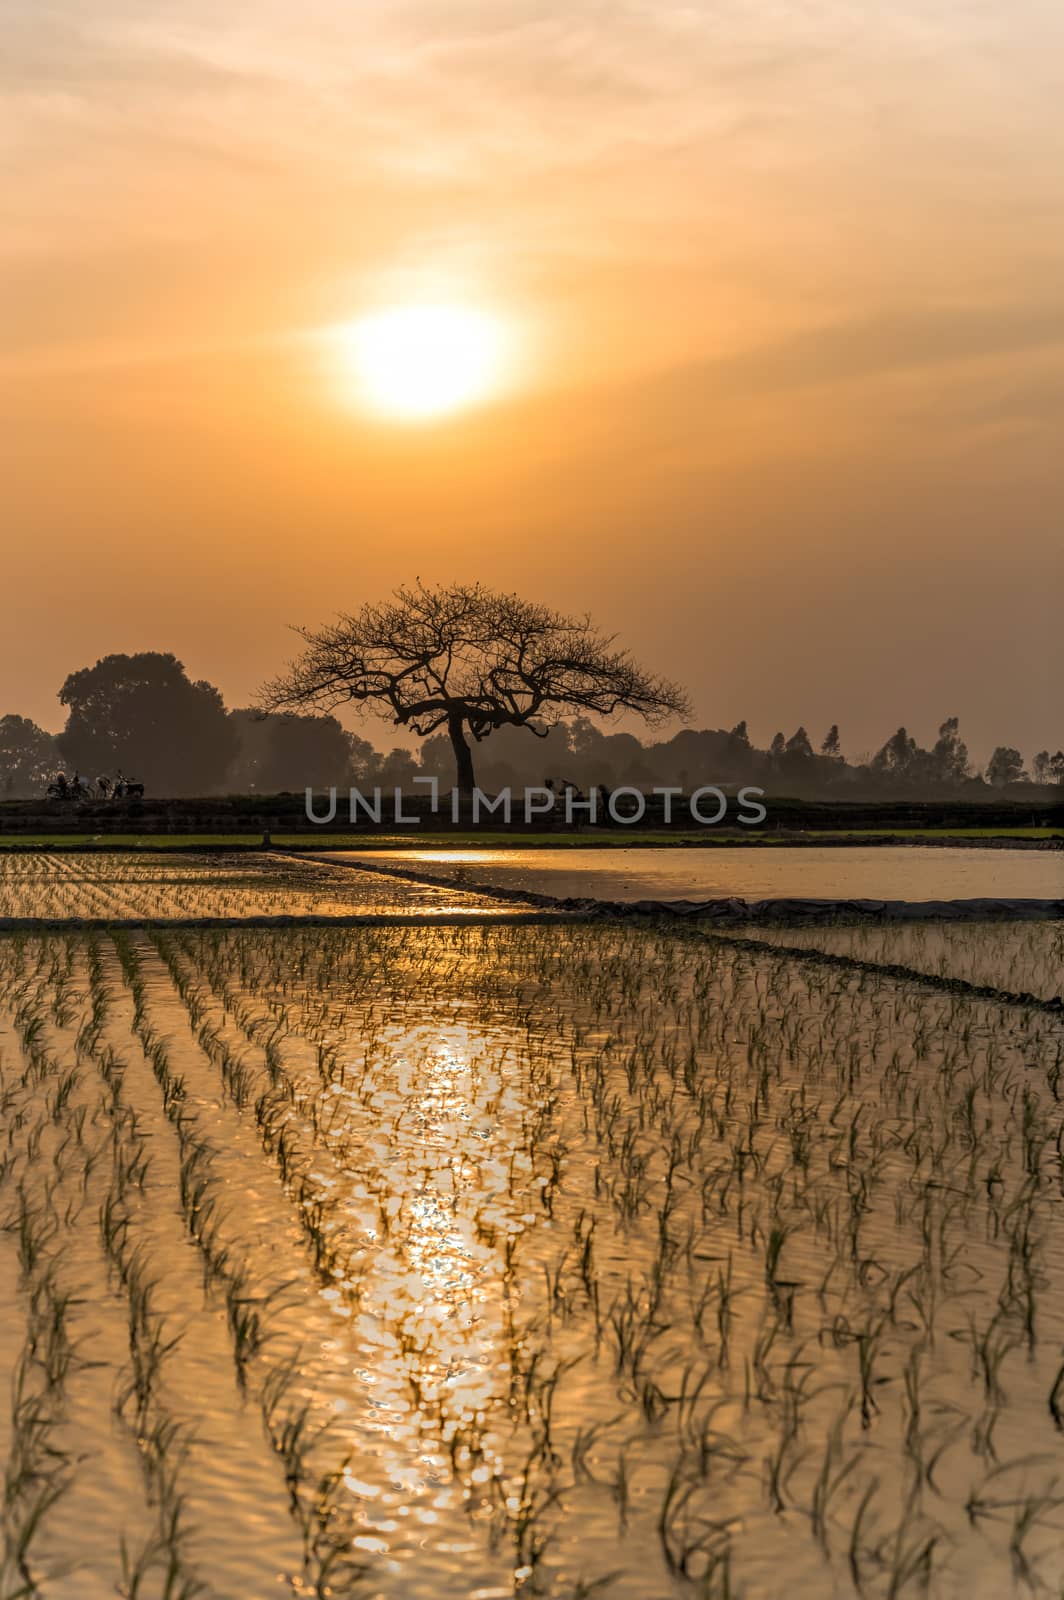 Freshly transplanted rice plants on water surface patches growing at sunset near Hanoi